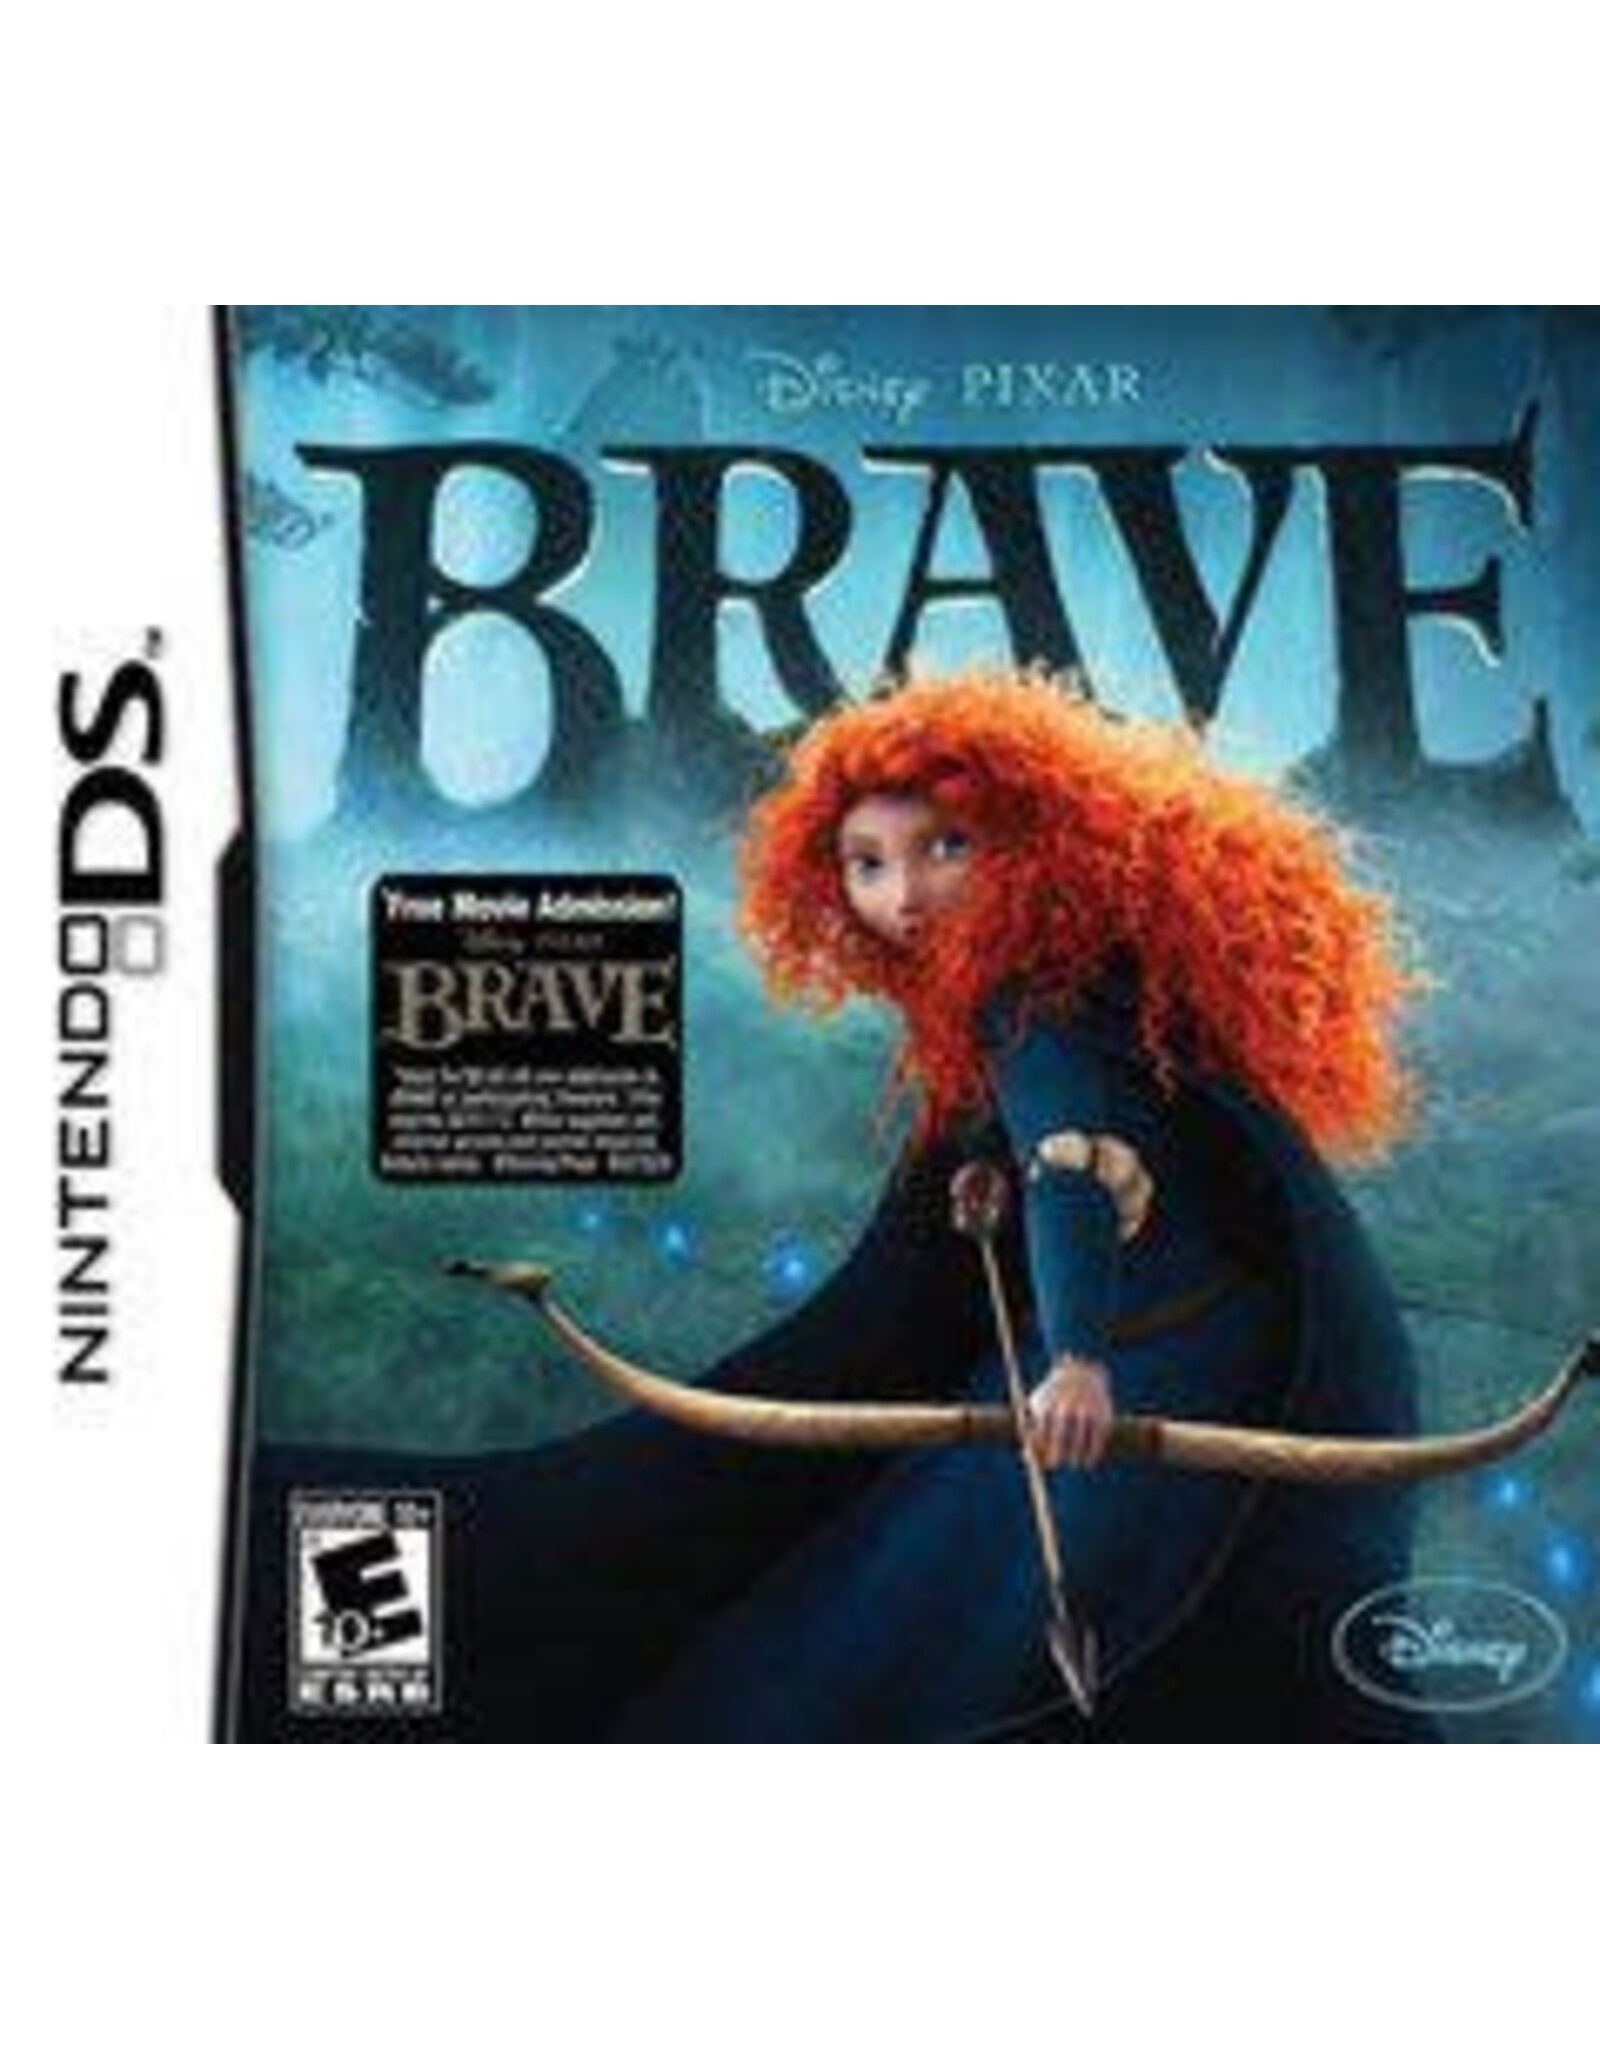 Nintendo DS Brave The Video Game (Cart Only)